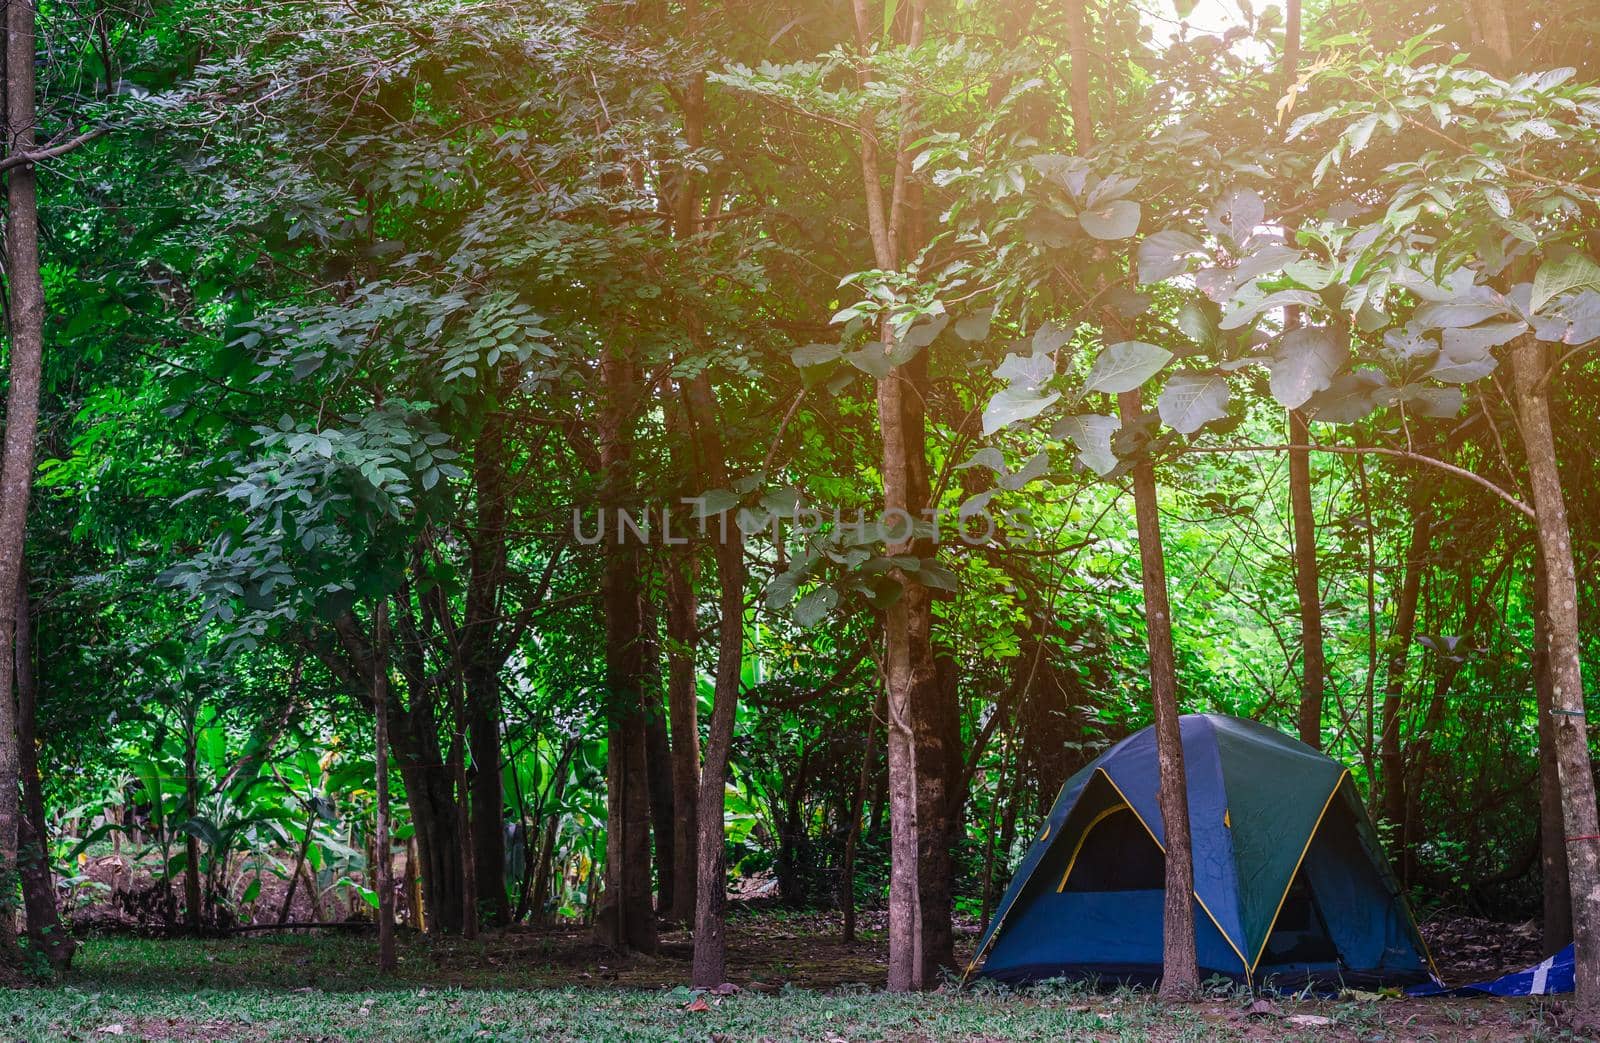 Camping and tent in nature park